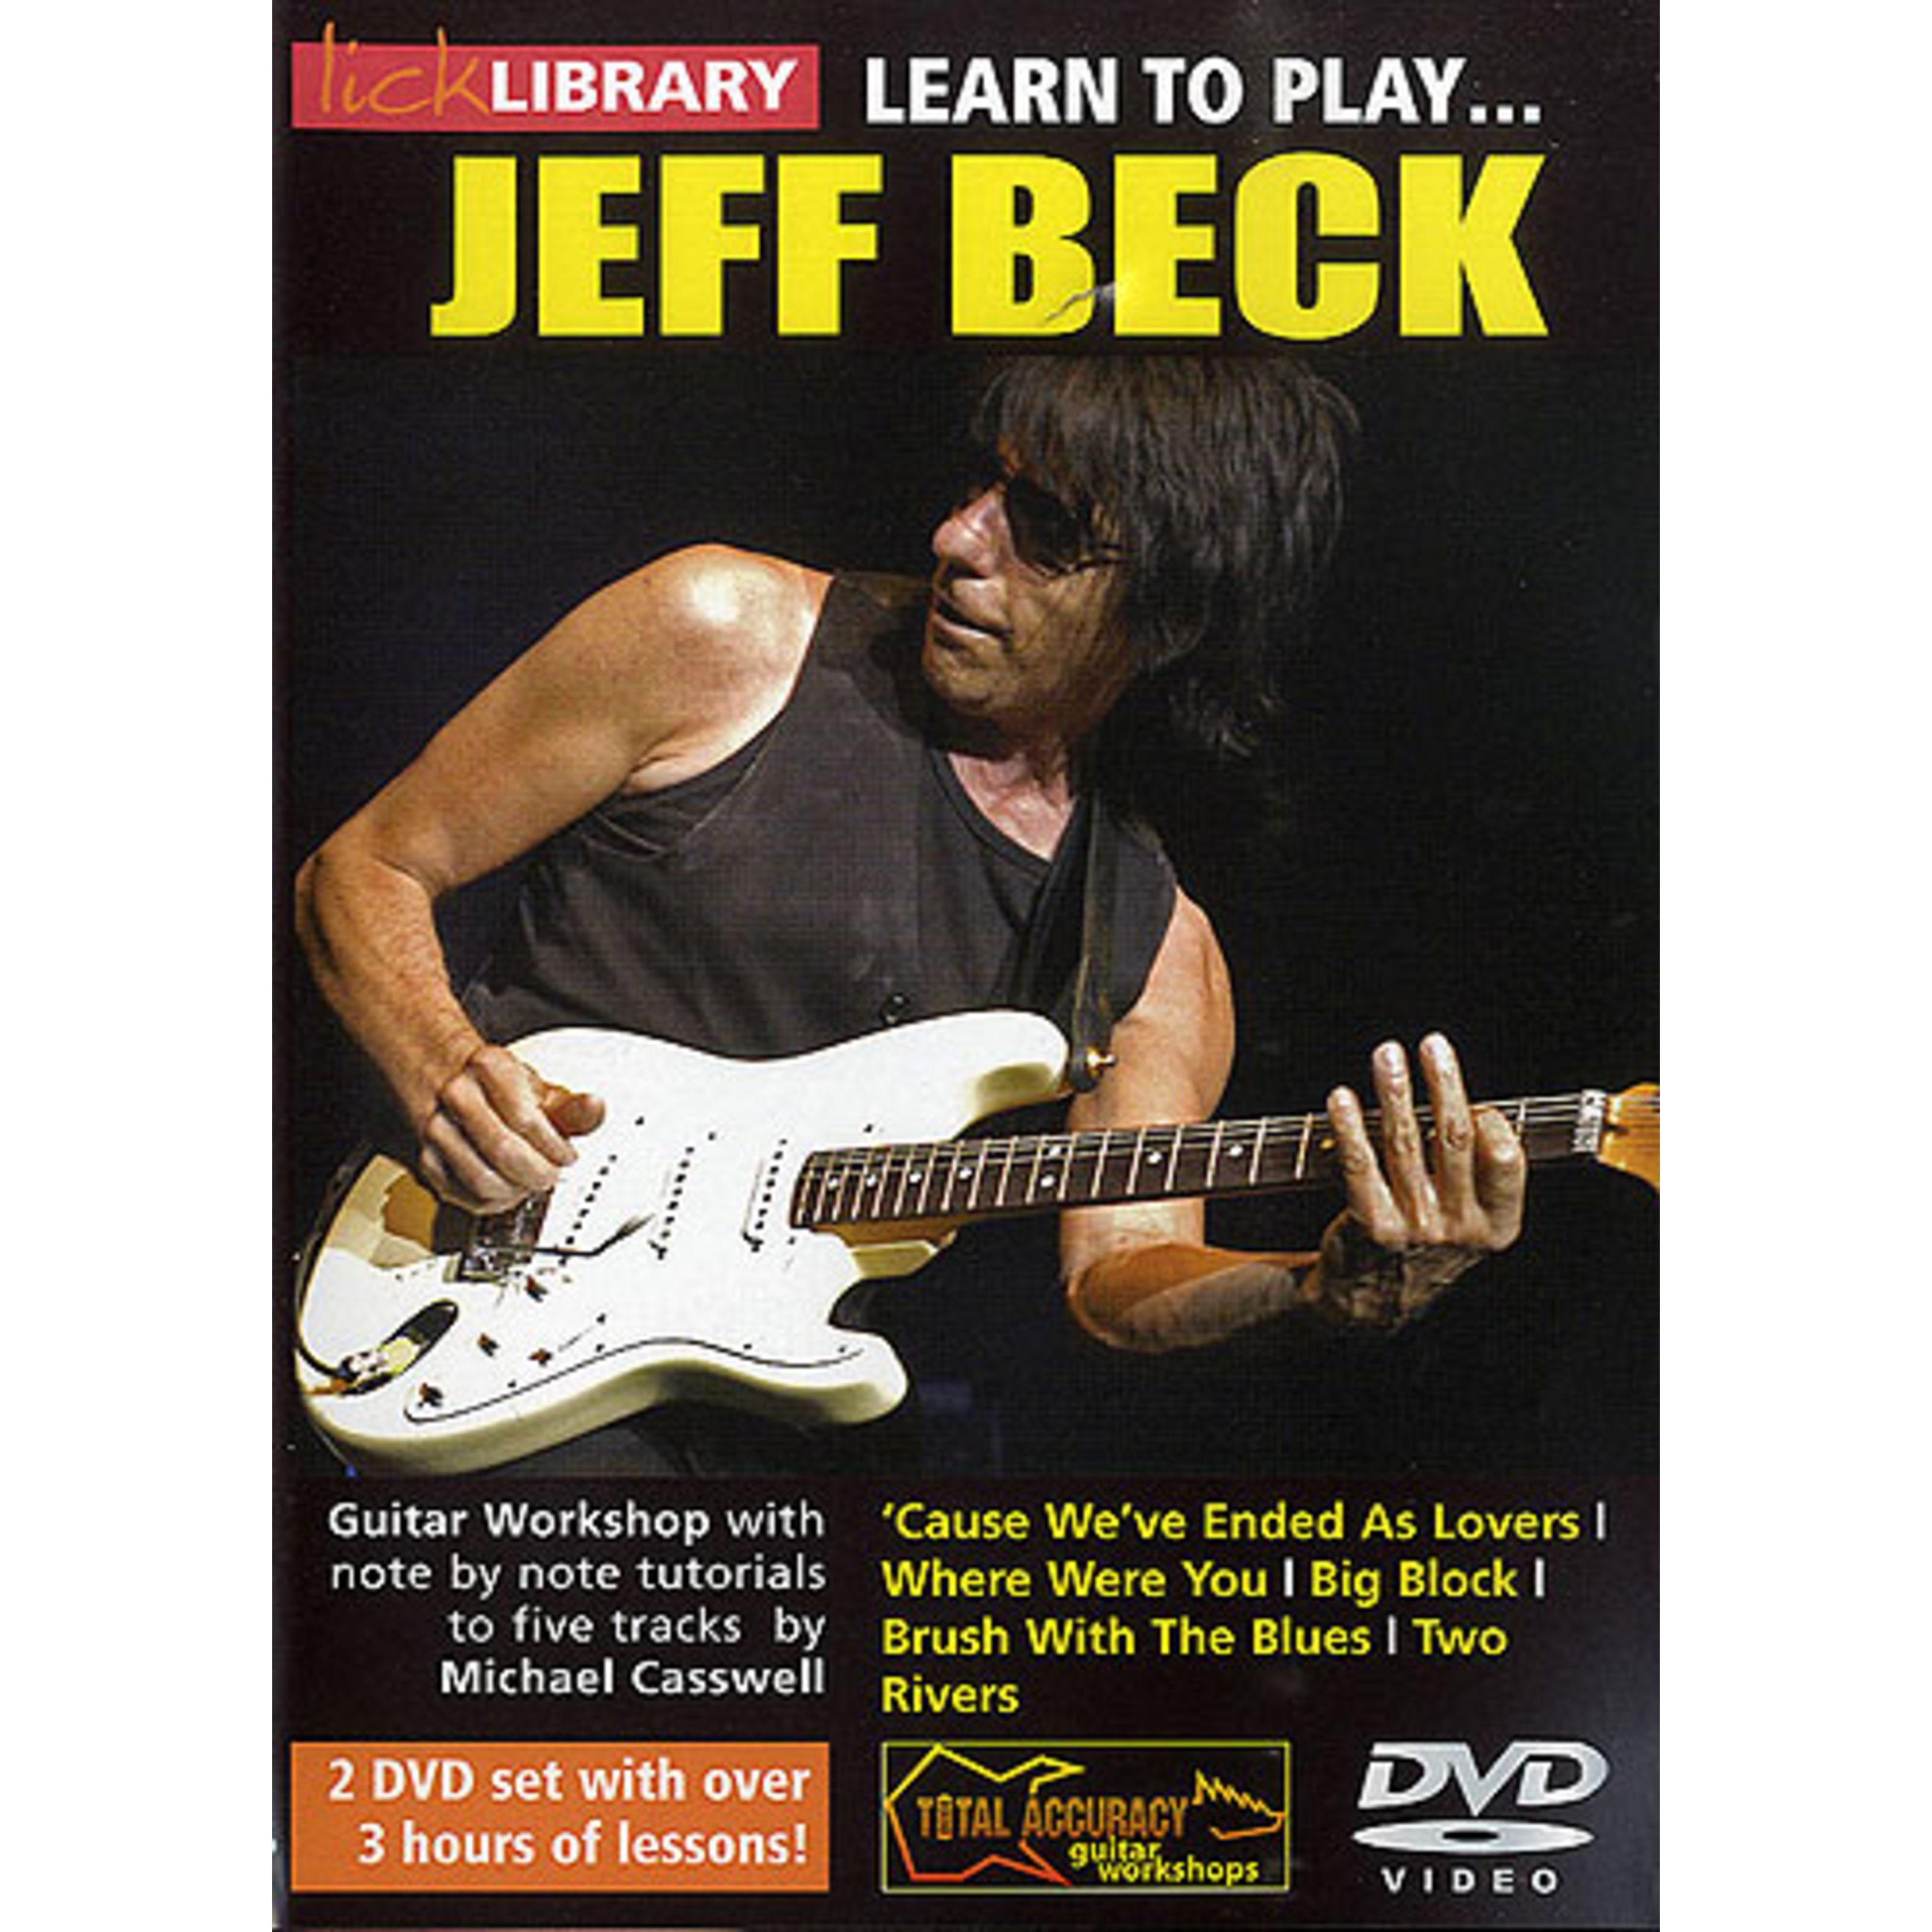 Roadrock International Lick Library: Learn to Play Jeff Beck DVD - DVD